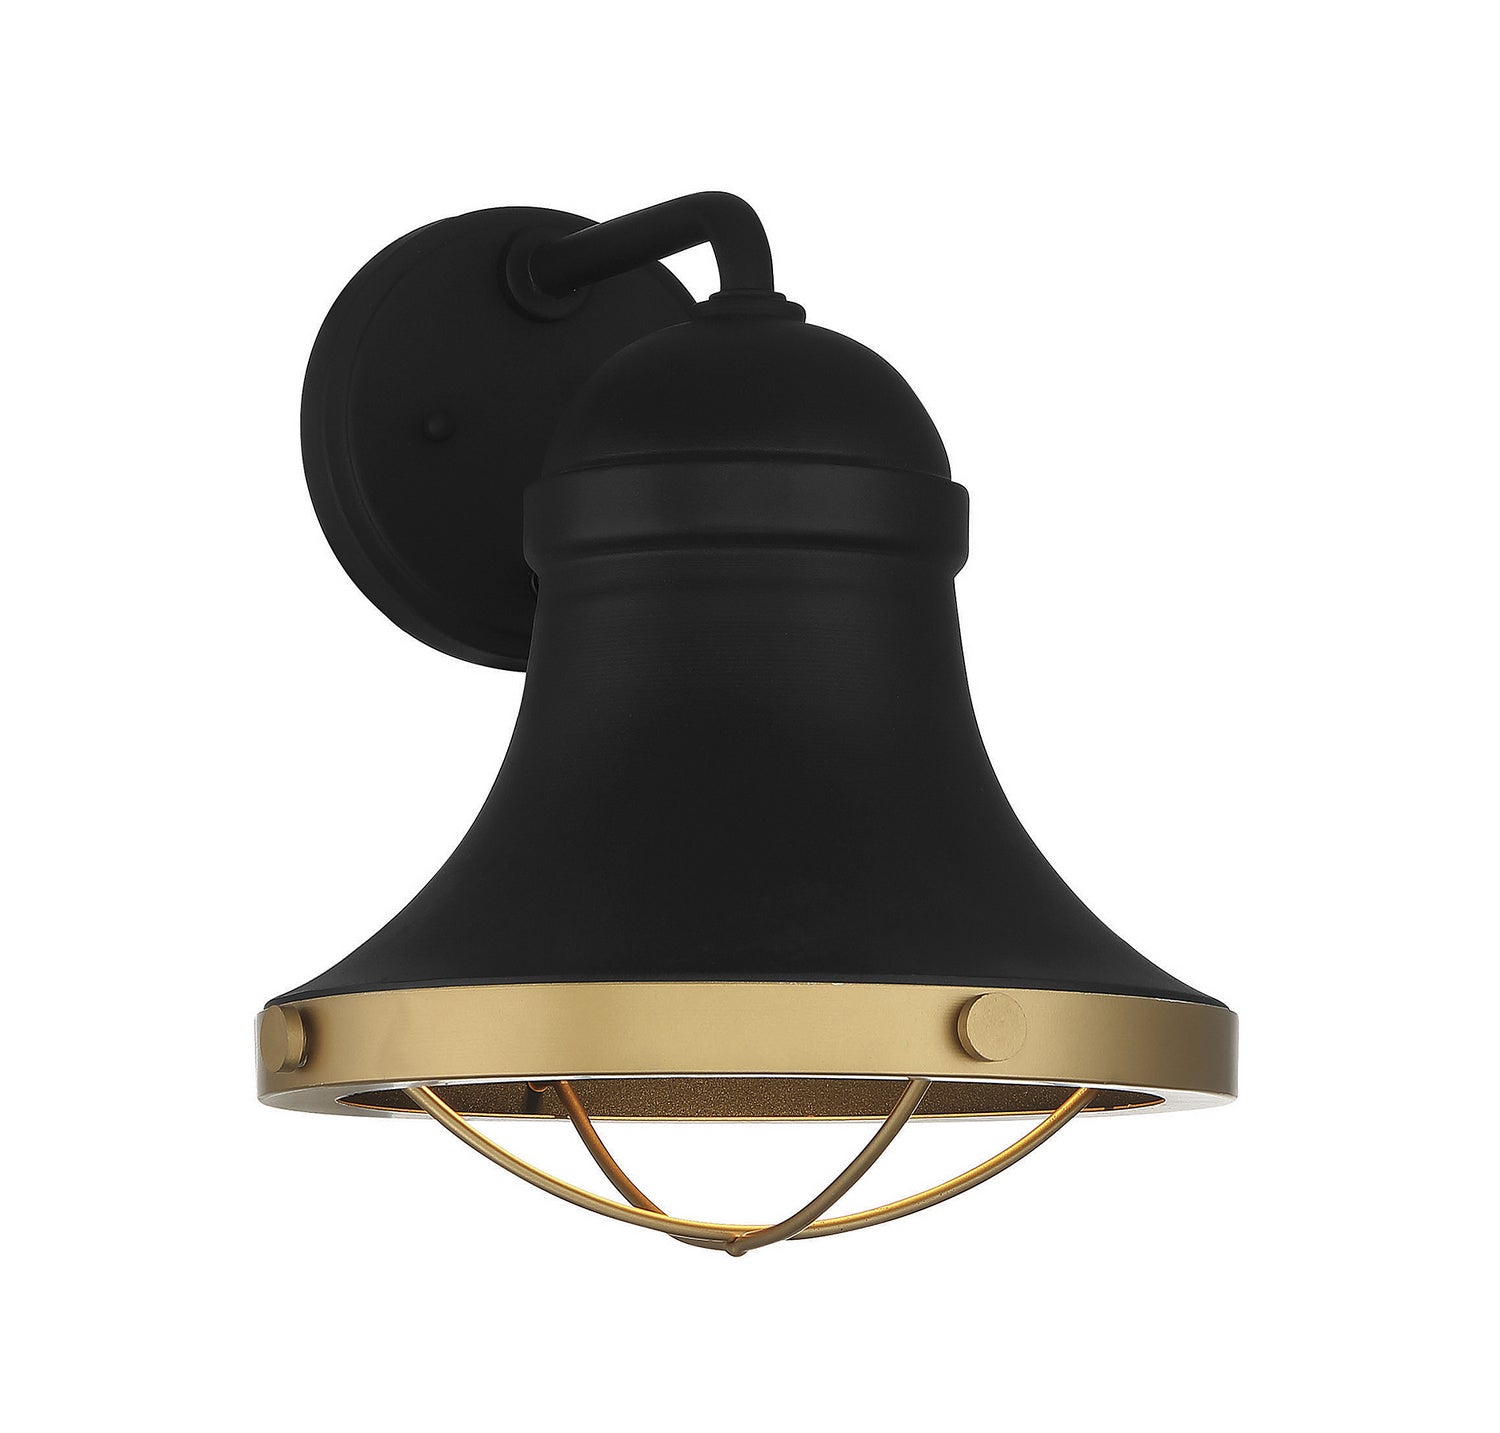 Savoy House - One Light Wall Sconce - Belmont - Textured Black with Warm Brass Accents- Union Lighting Luminaires Decor